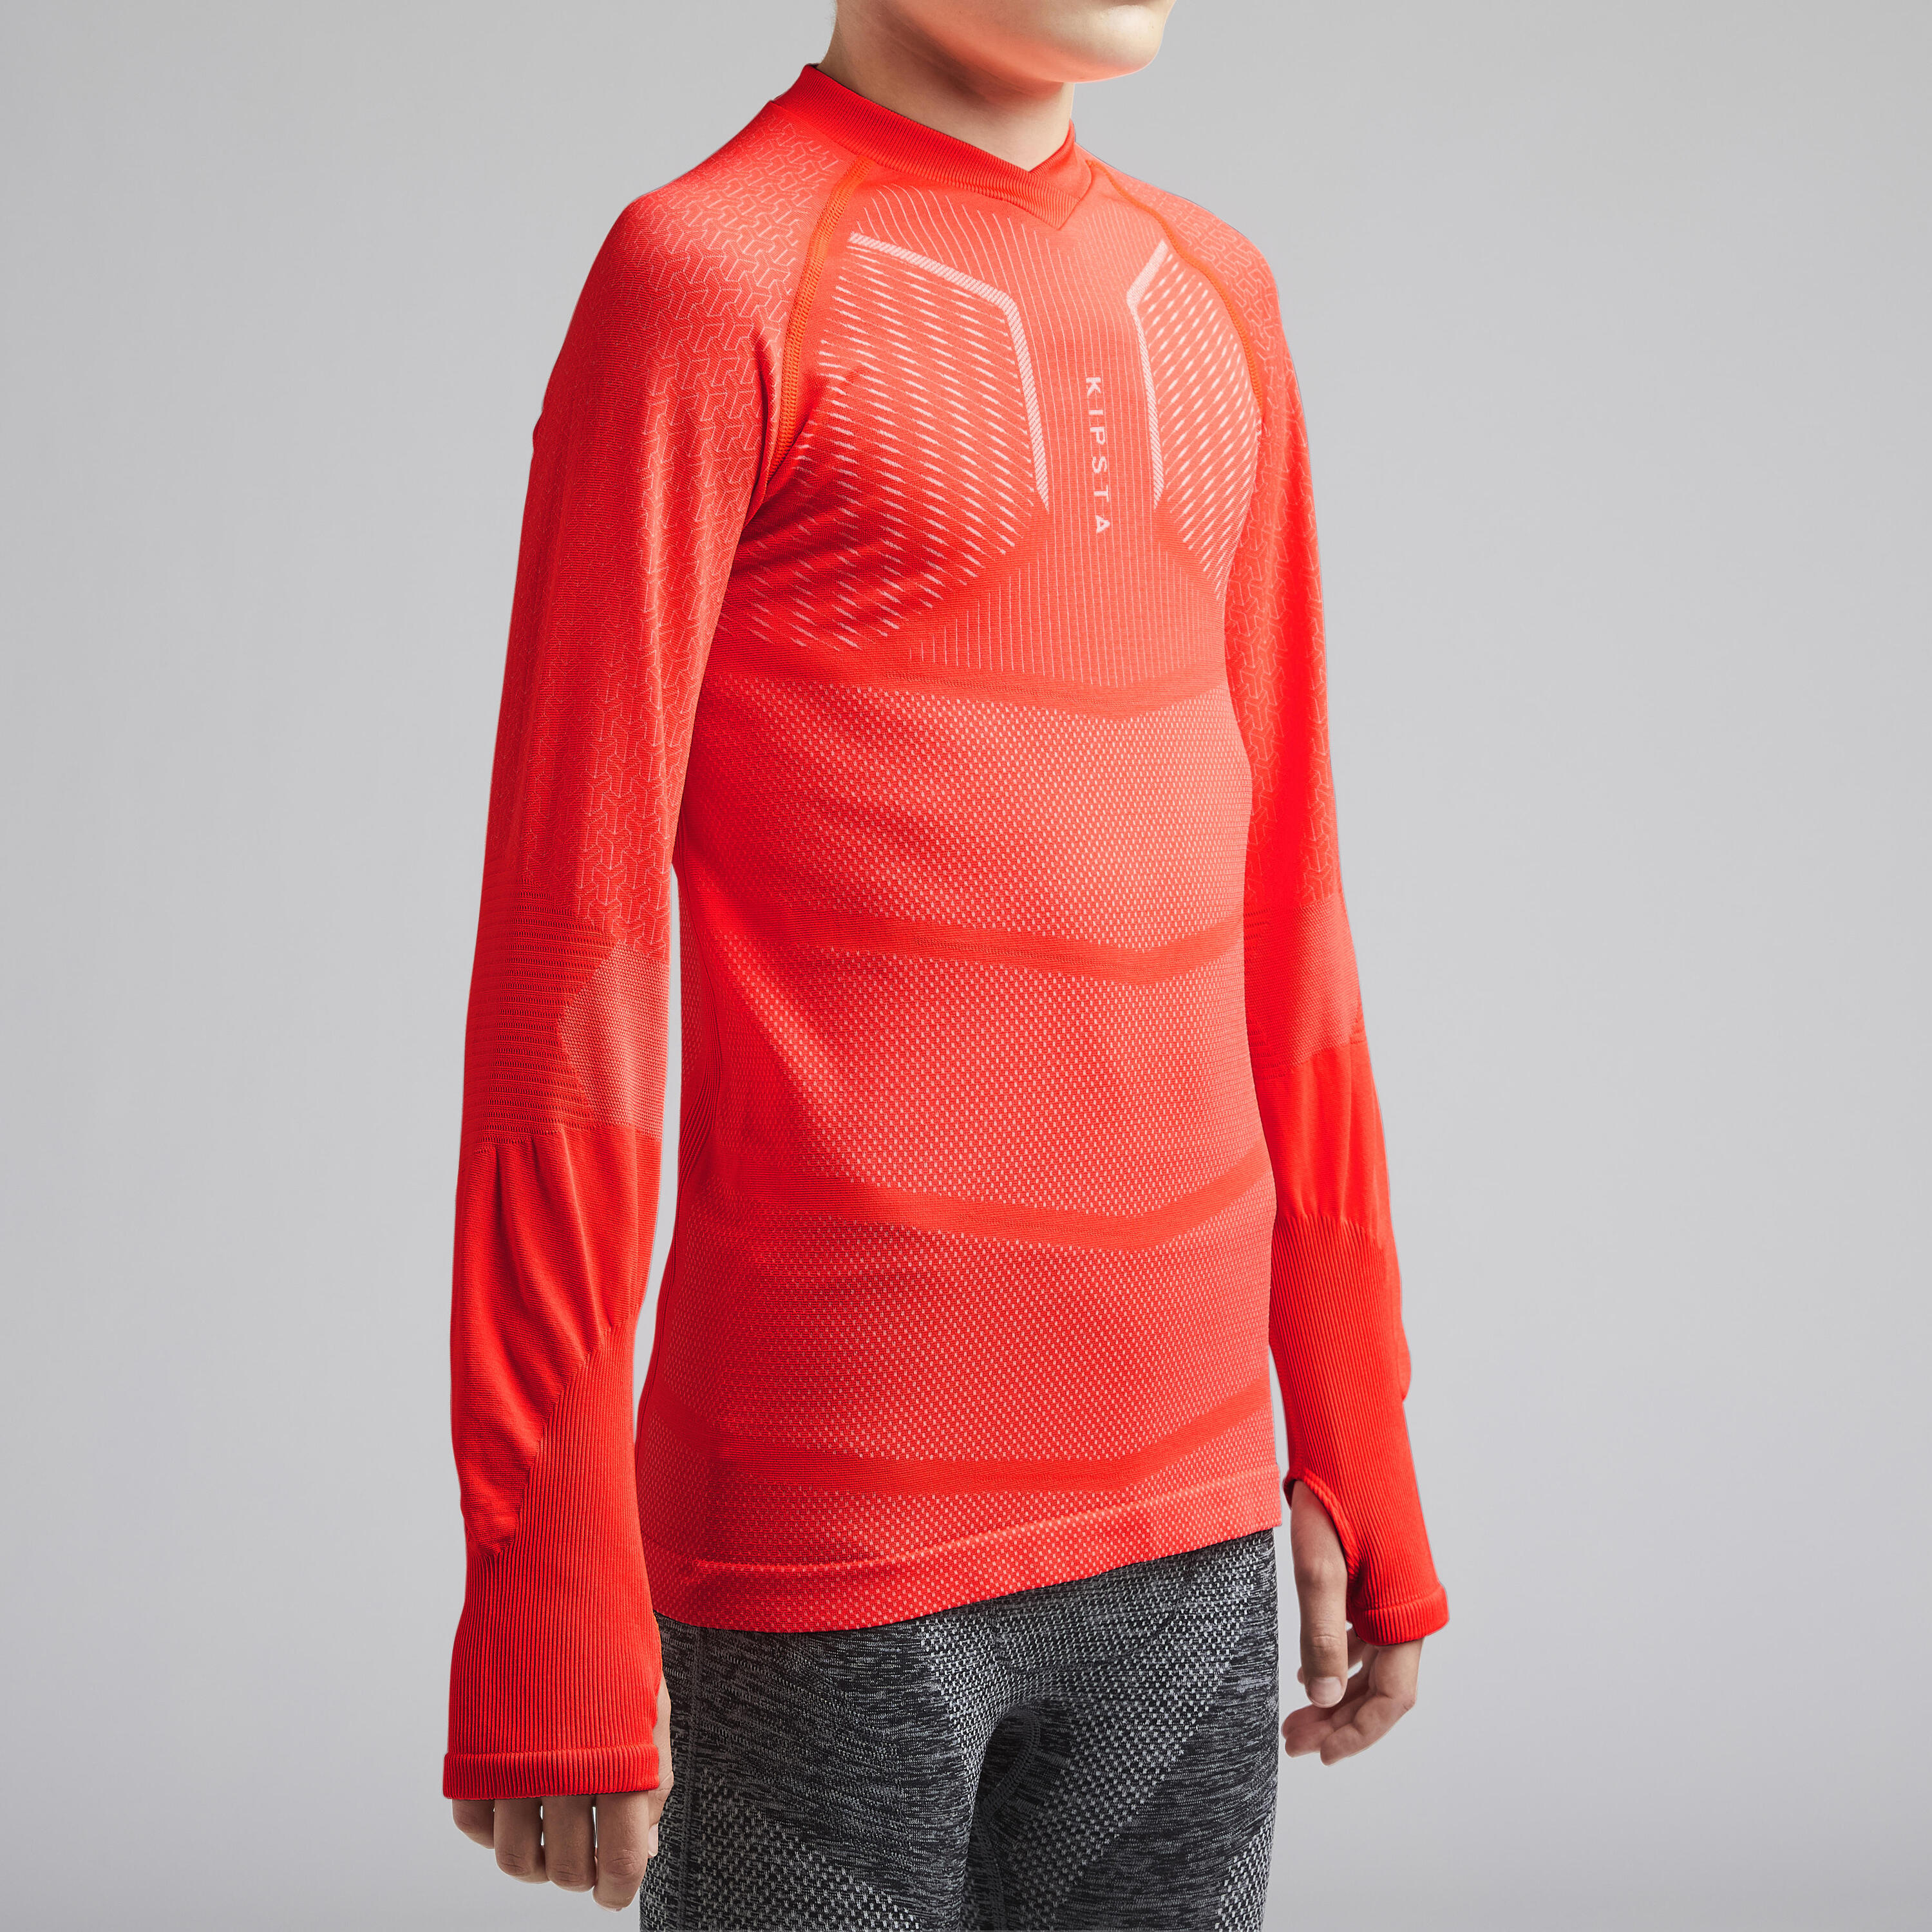 Kids' Long-Sleeved Football Base Layer Top Keepdry 500 - Red 2/9